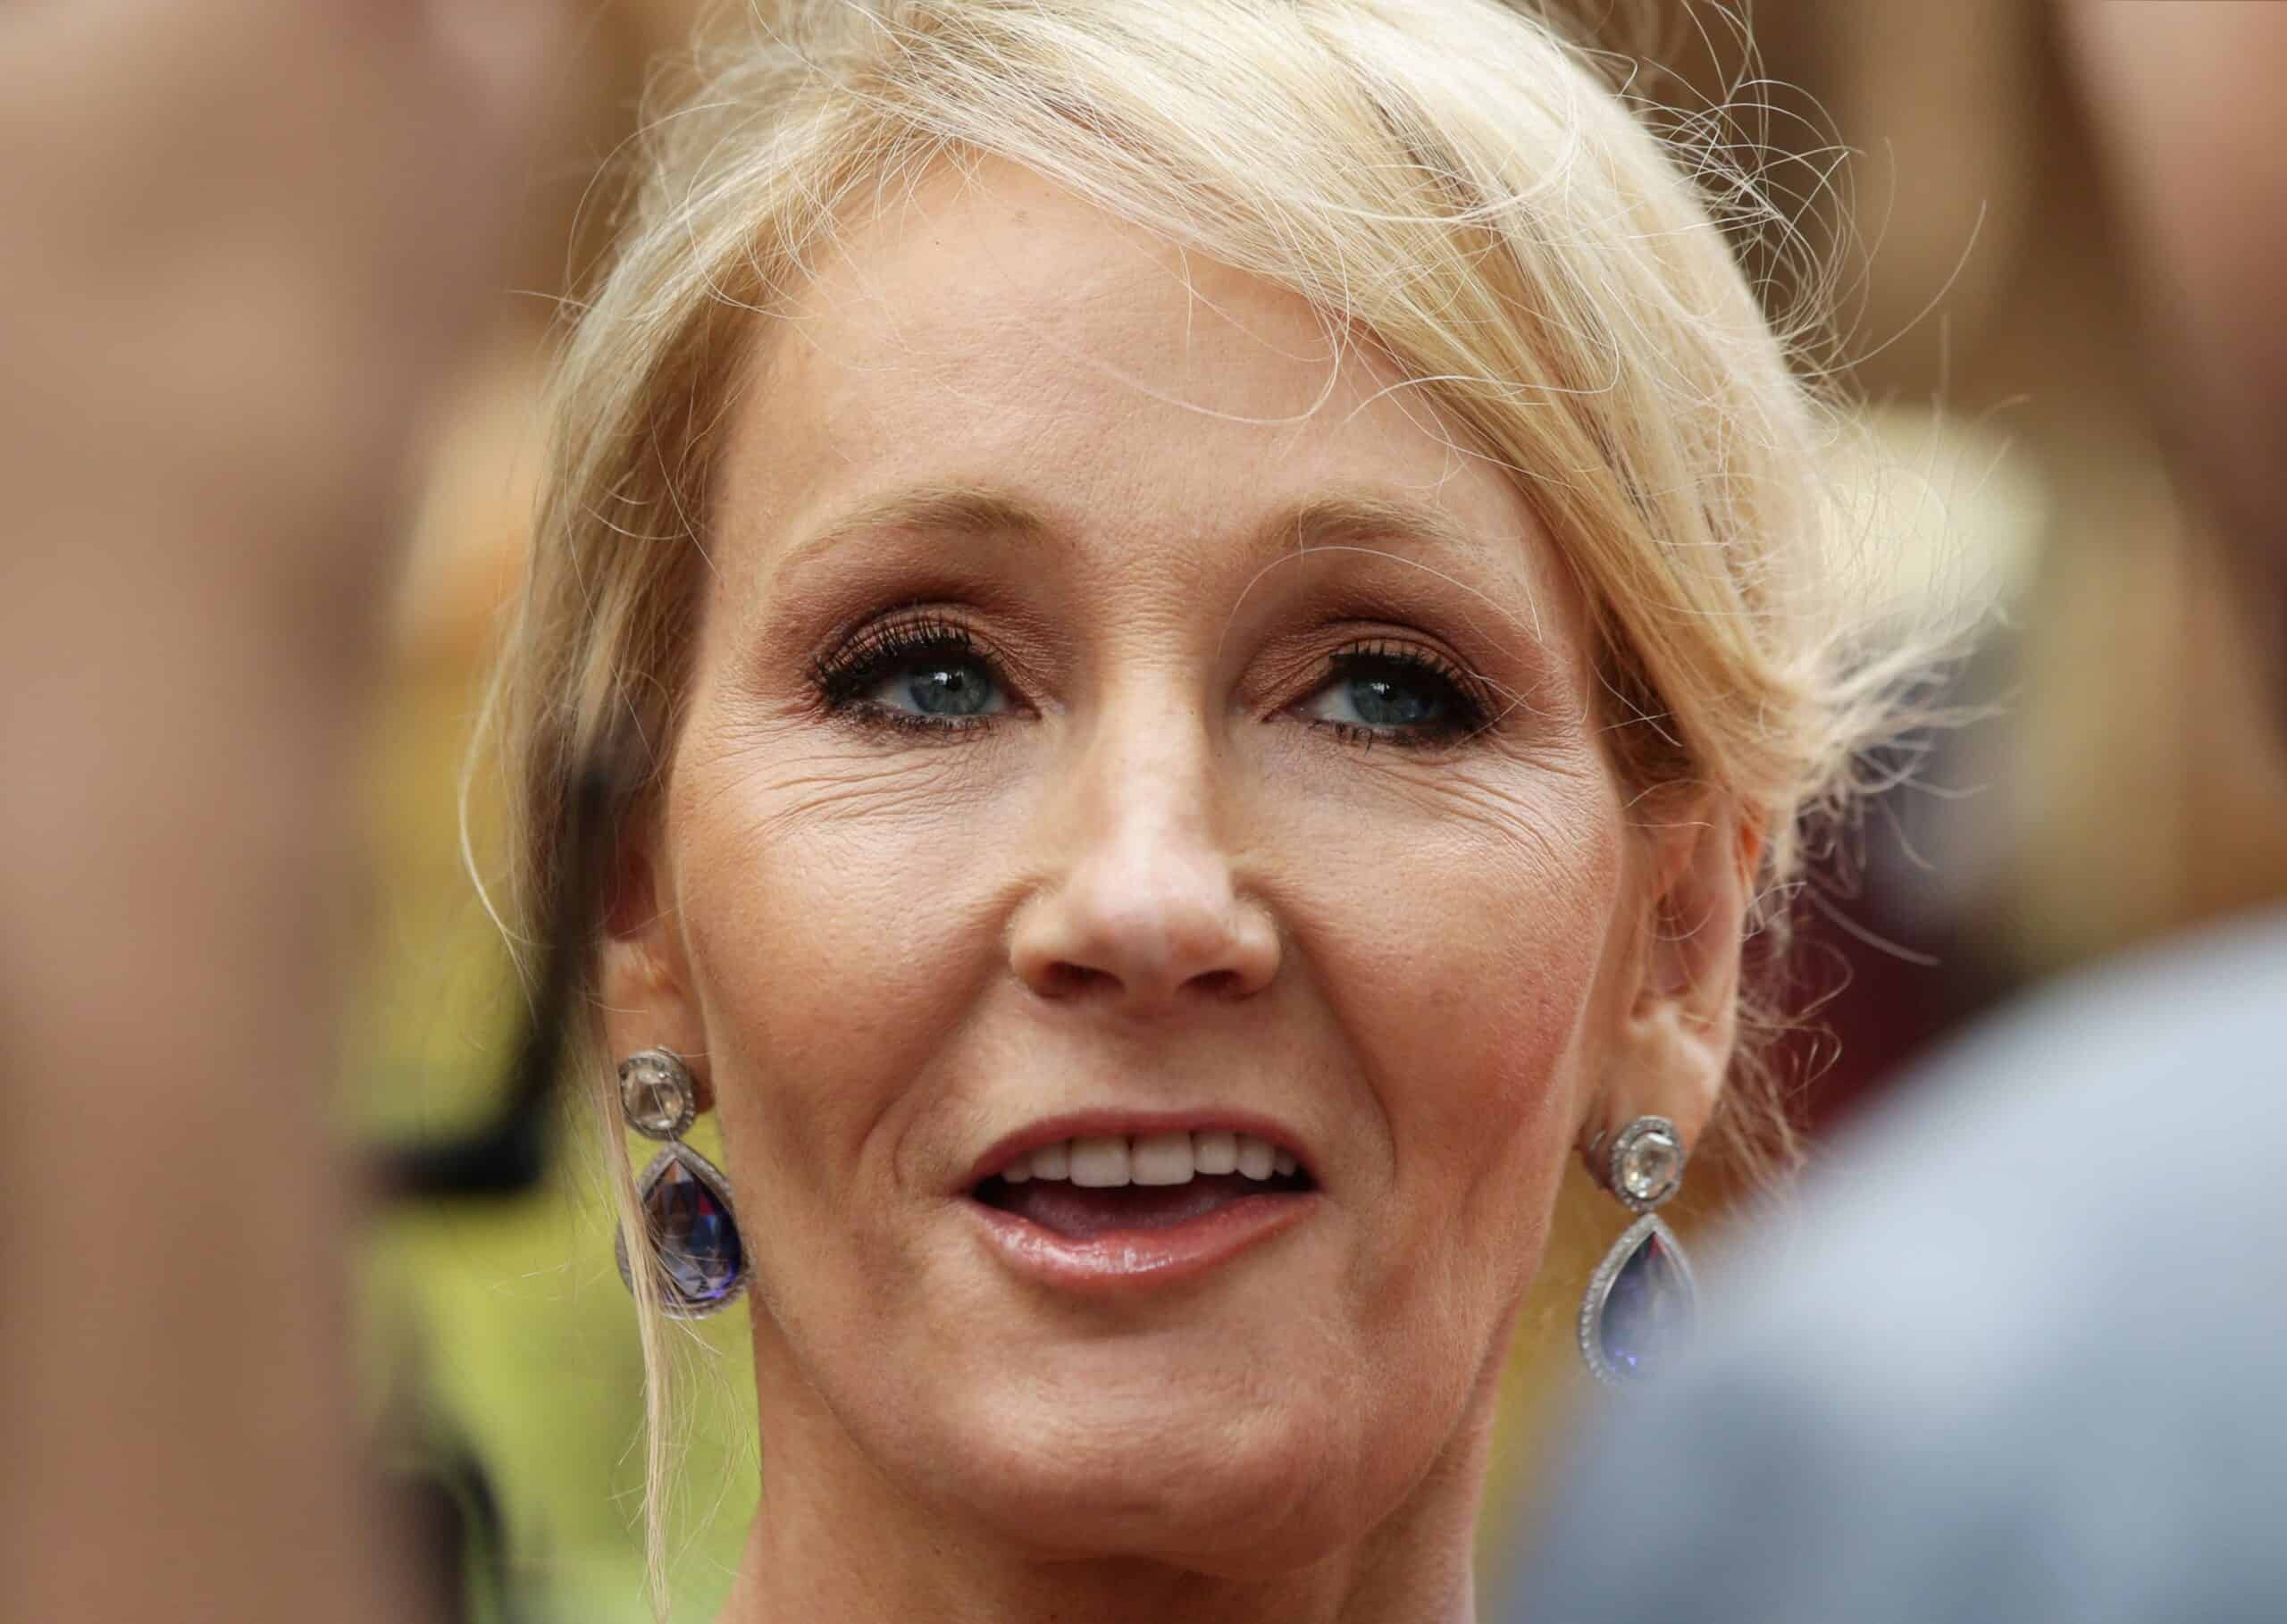 ‘Arrest me’: JK Rowling lays down the gauntlet as new hate crime laws come into effect